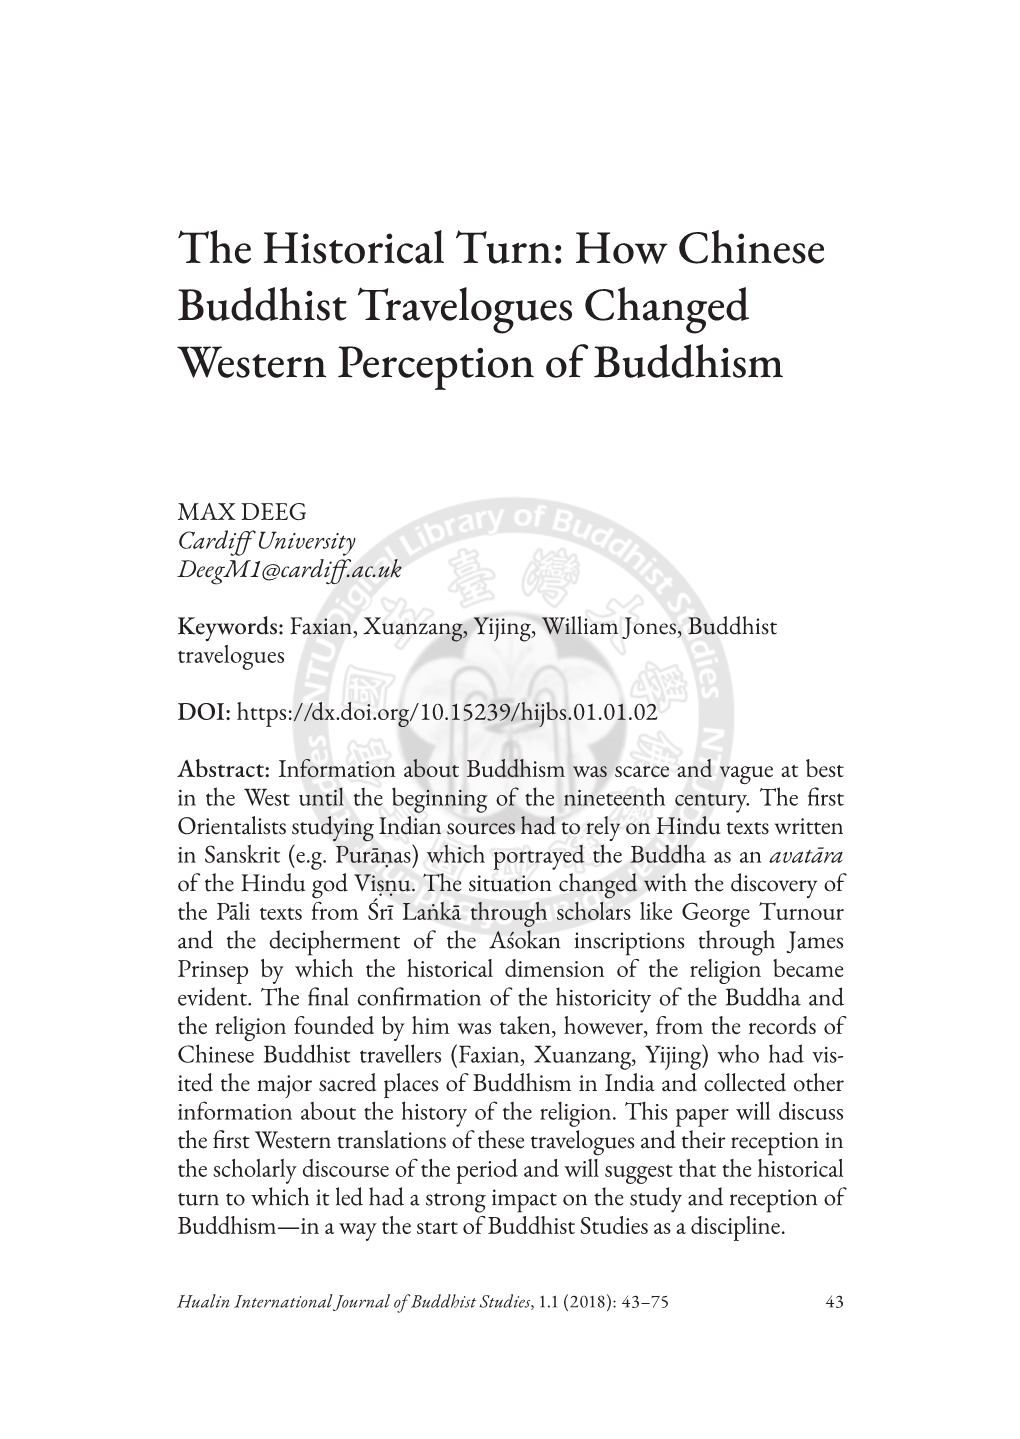 How Chinese Buddhist Travelogues Changed Western Perception of Buddhism